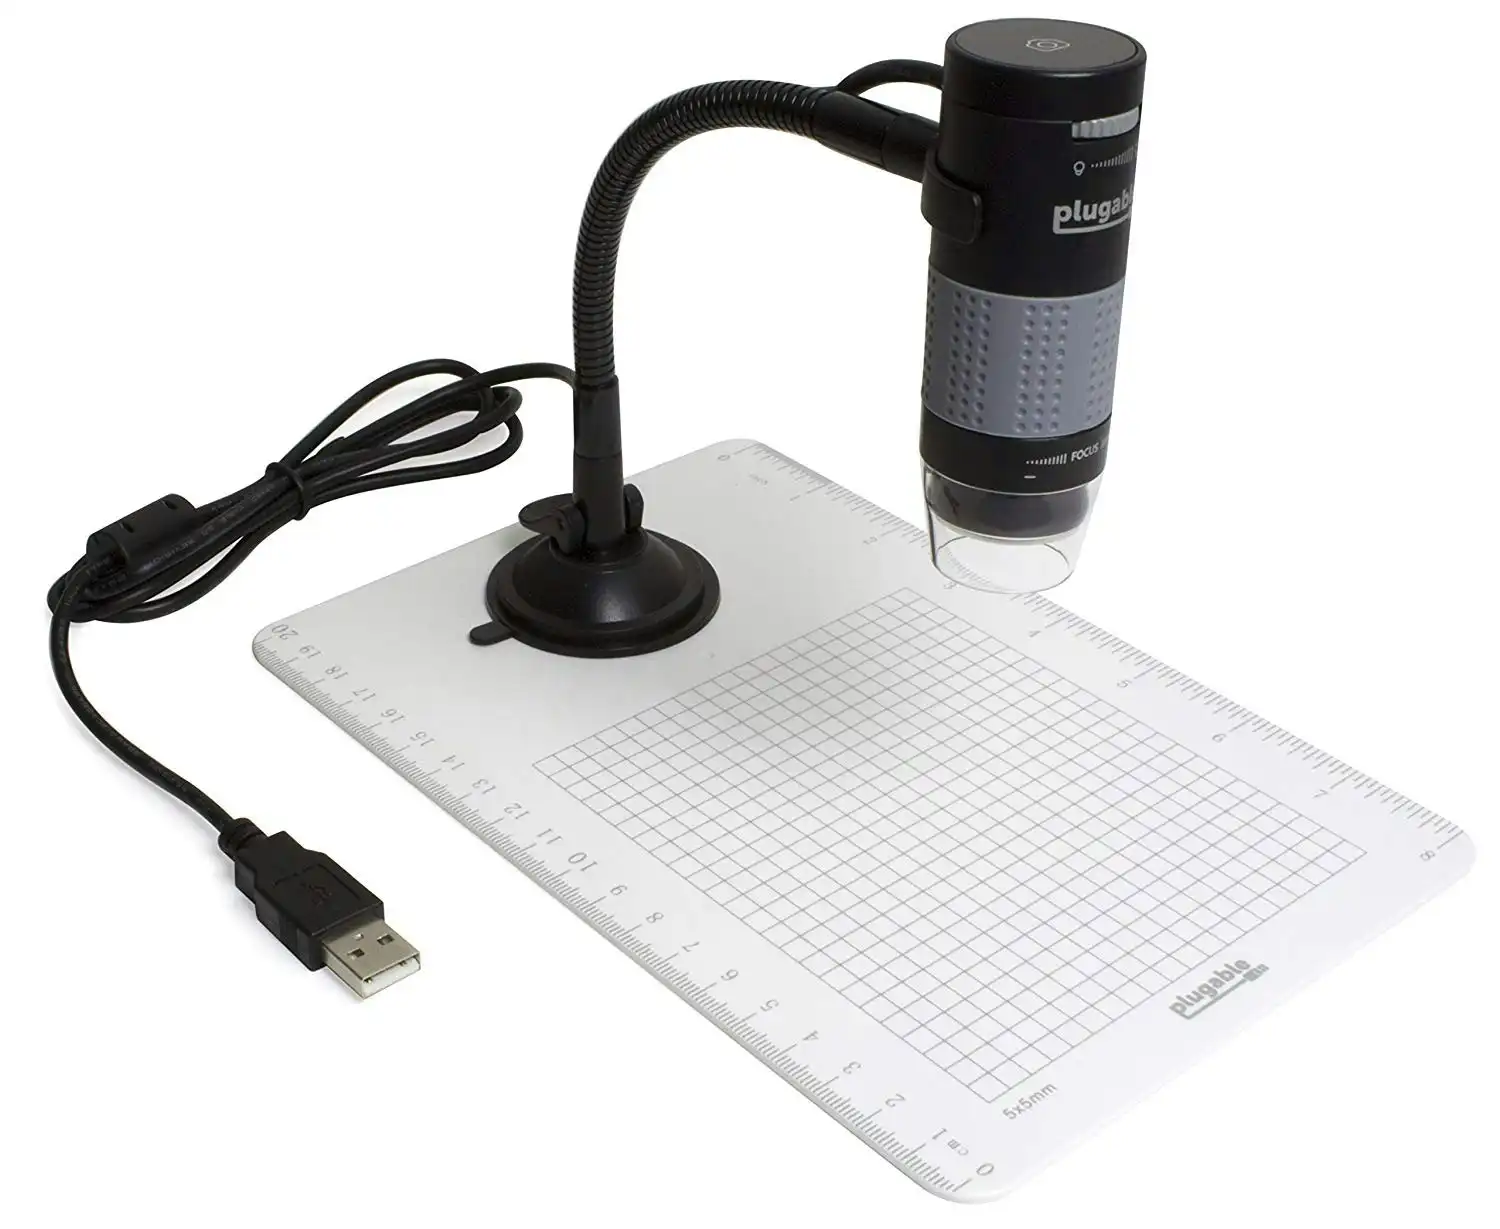 Plugable USB 2.0 Digital Microscope with Flexible Arm Observation Stand for Windows, Mac, Linux (2 MP, 250x Magnification).